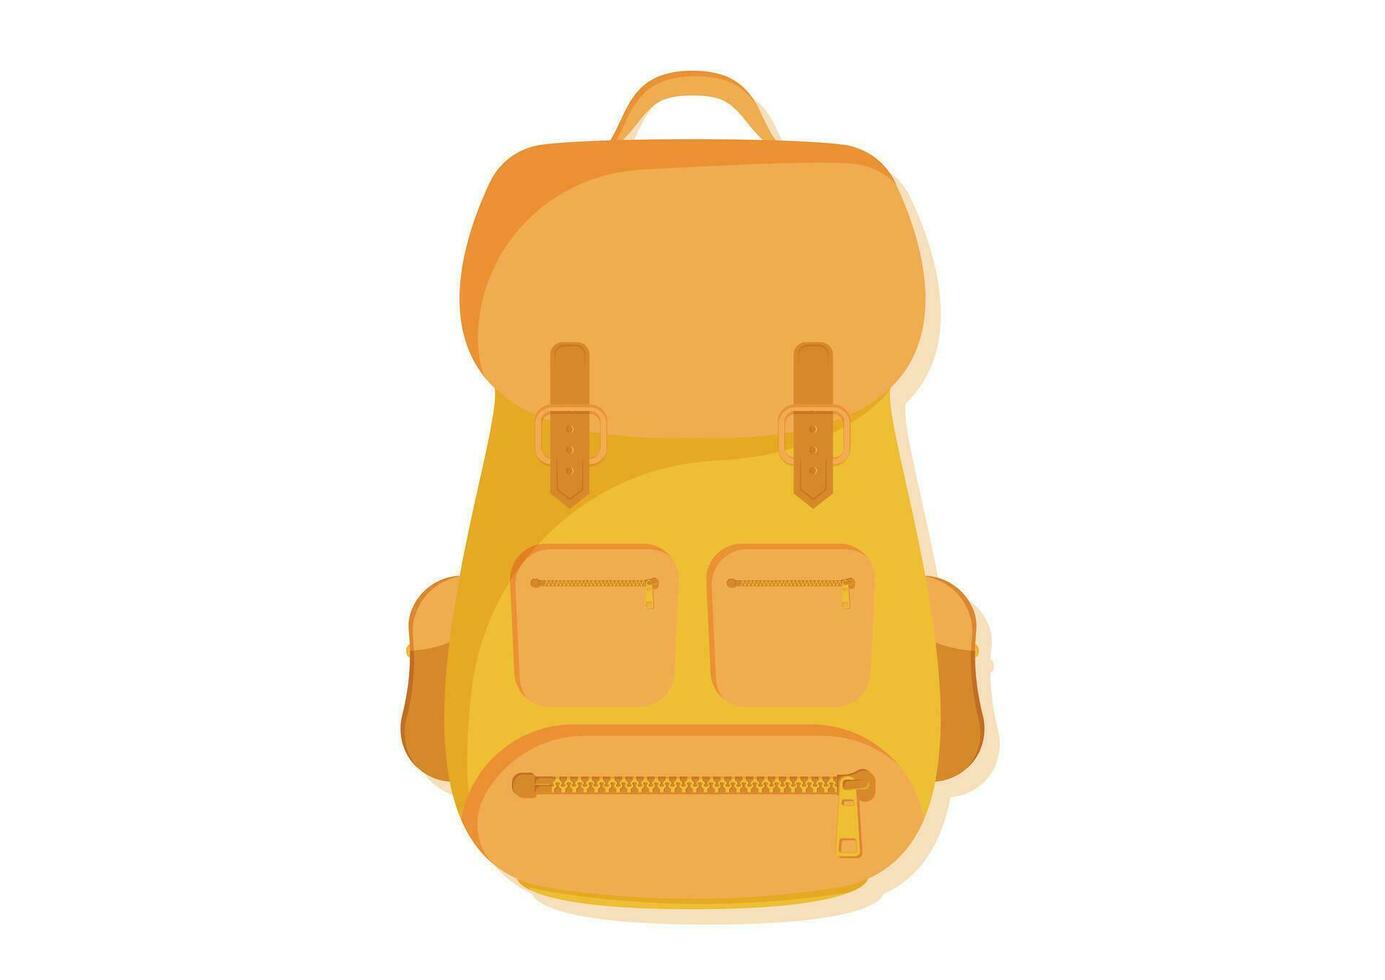 Hiking backpack bag vector flat design. Tourist backpack isolated on white background